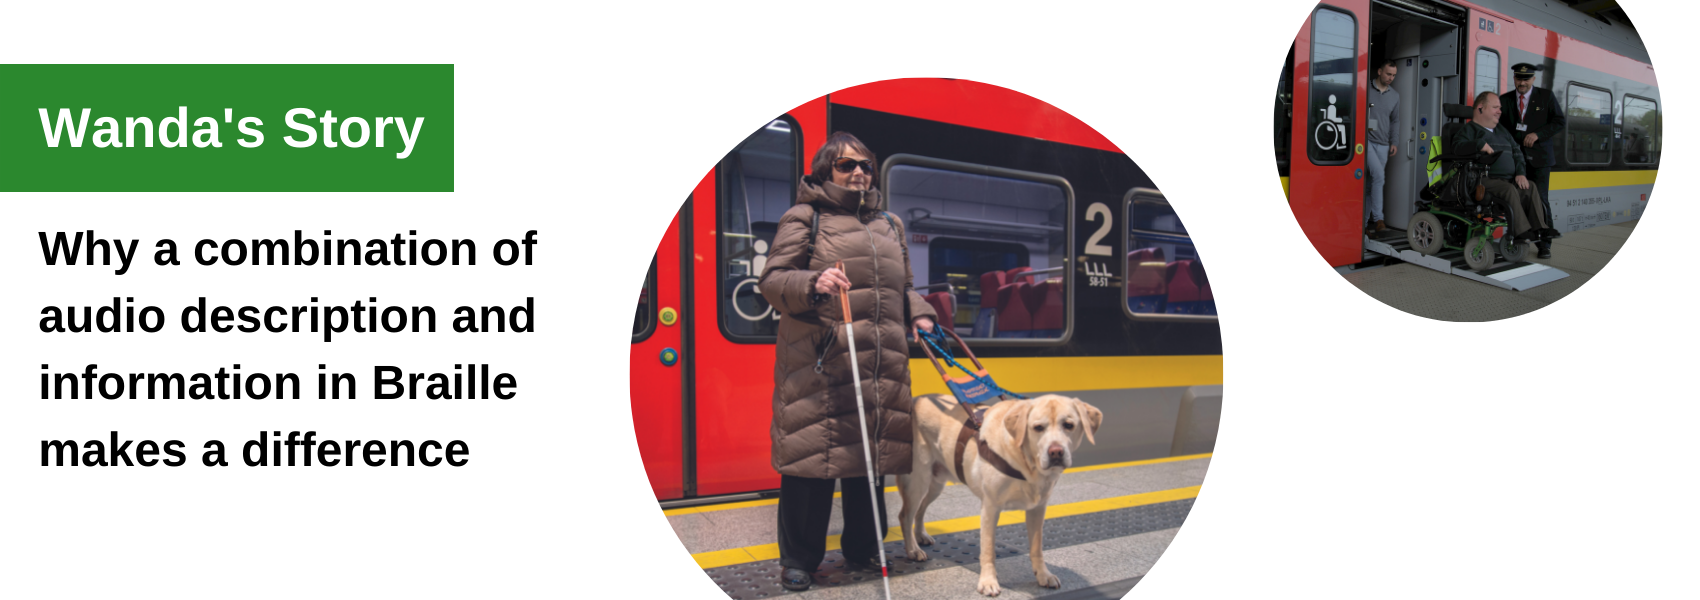 Wanda's Story: Why a combination of audio description and information in Braille makes a difference. Photo of a woman in a thick coat and dark glasses, with a guide dog and a cane standing in front of a red traing. Photo of a man in a wheelchair exiting a train via a ramp; an railway employee oversees the process